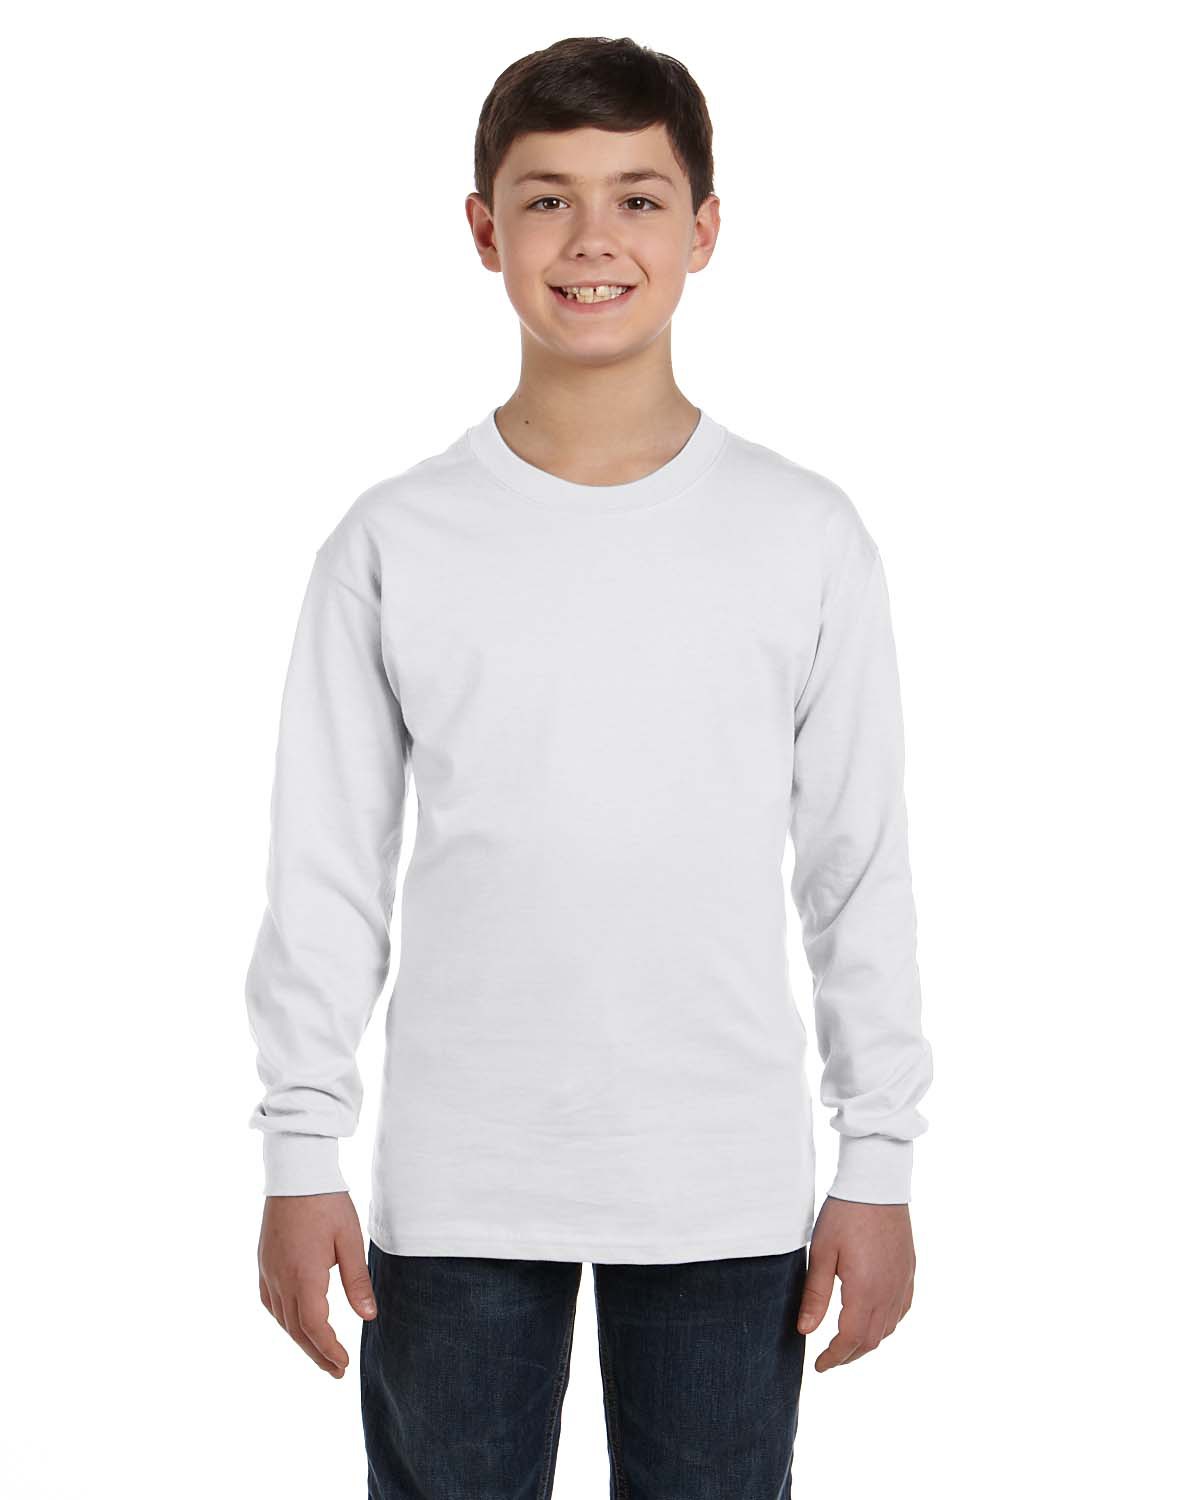 Hanes 5546 - Authentic Youth Long Sleeve T-Shirt